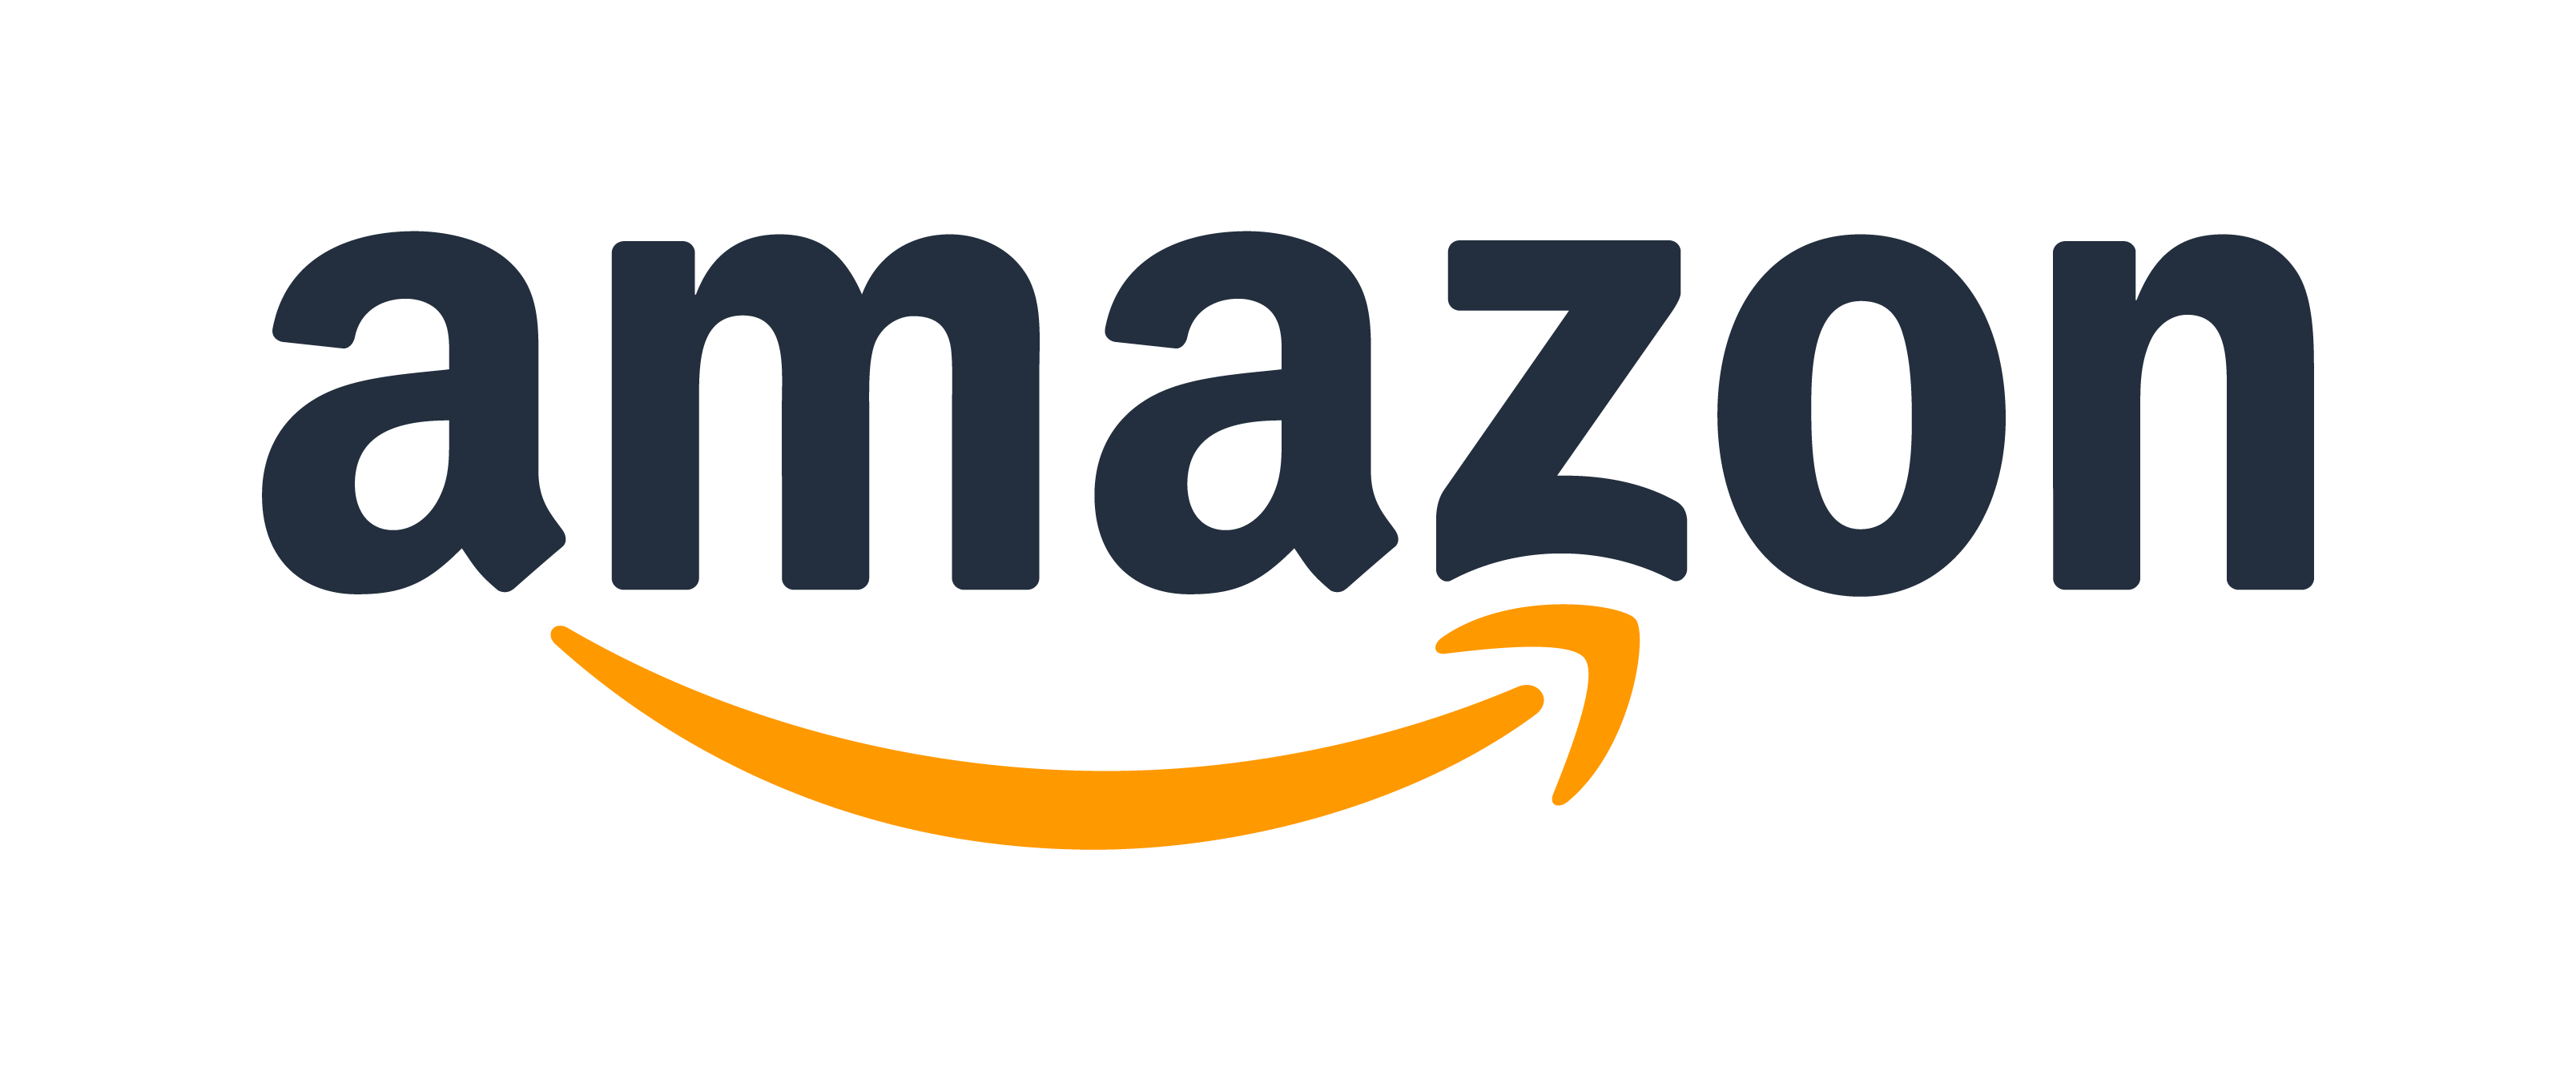 Amazon posts Q1 earnings, announces plans for free Prime 1-day shipping